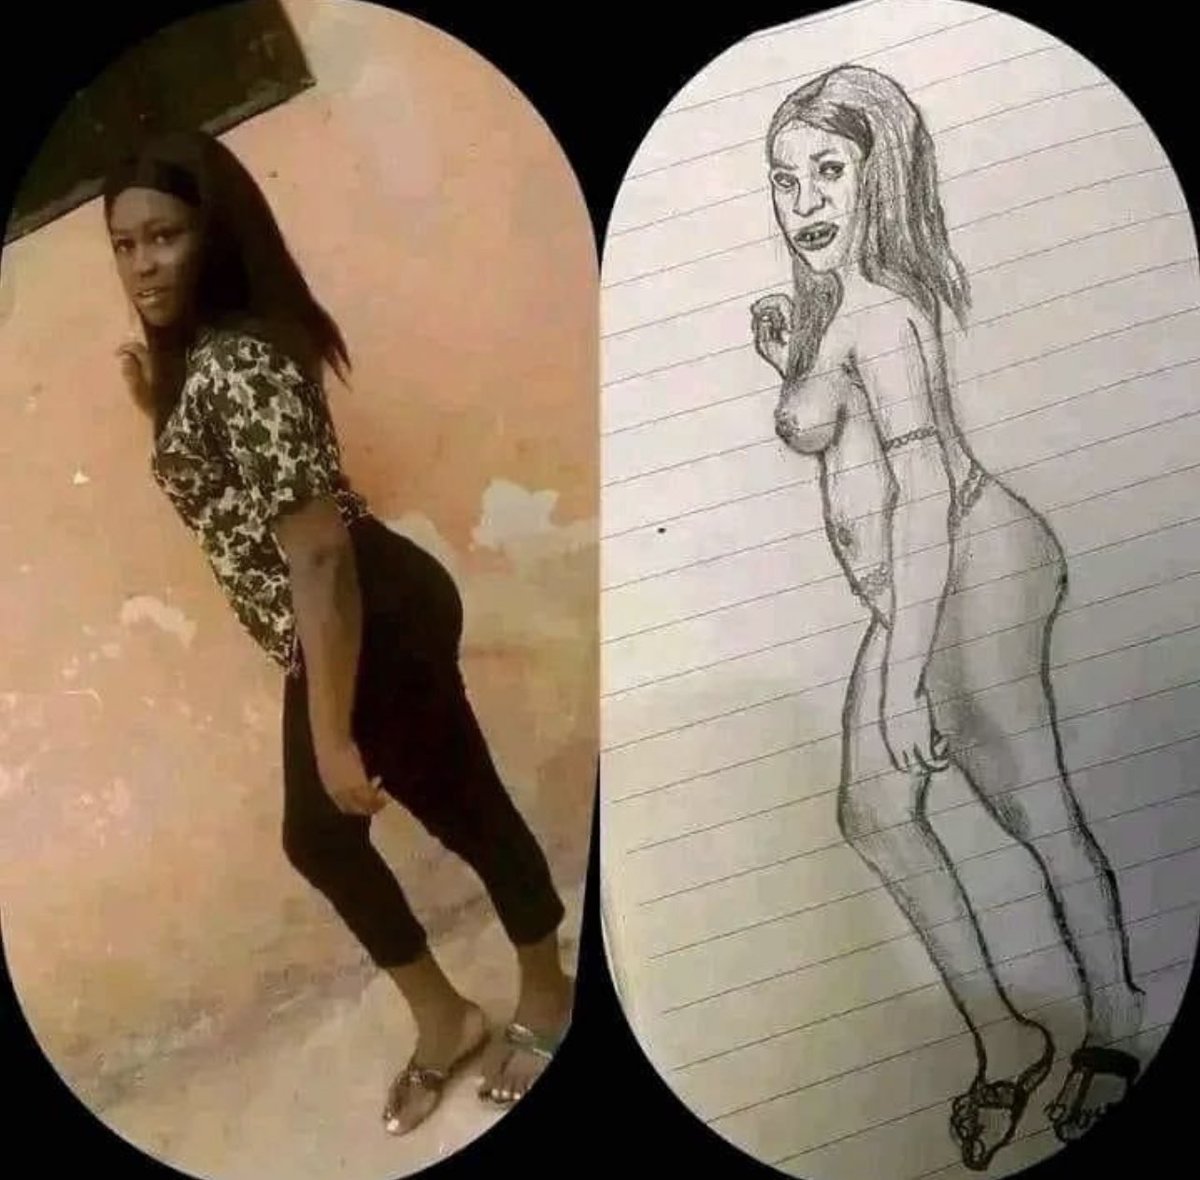 If I hear pim from any girl here, I will ask him to draw ur OWN😳😳😳